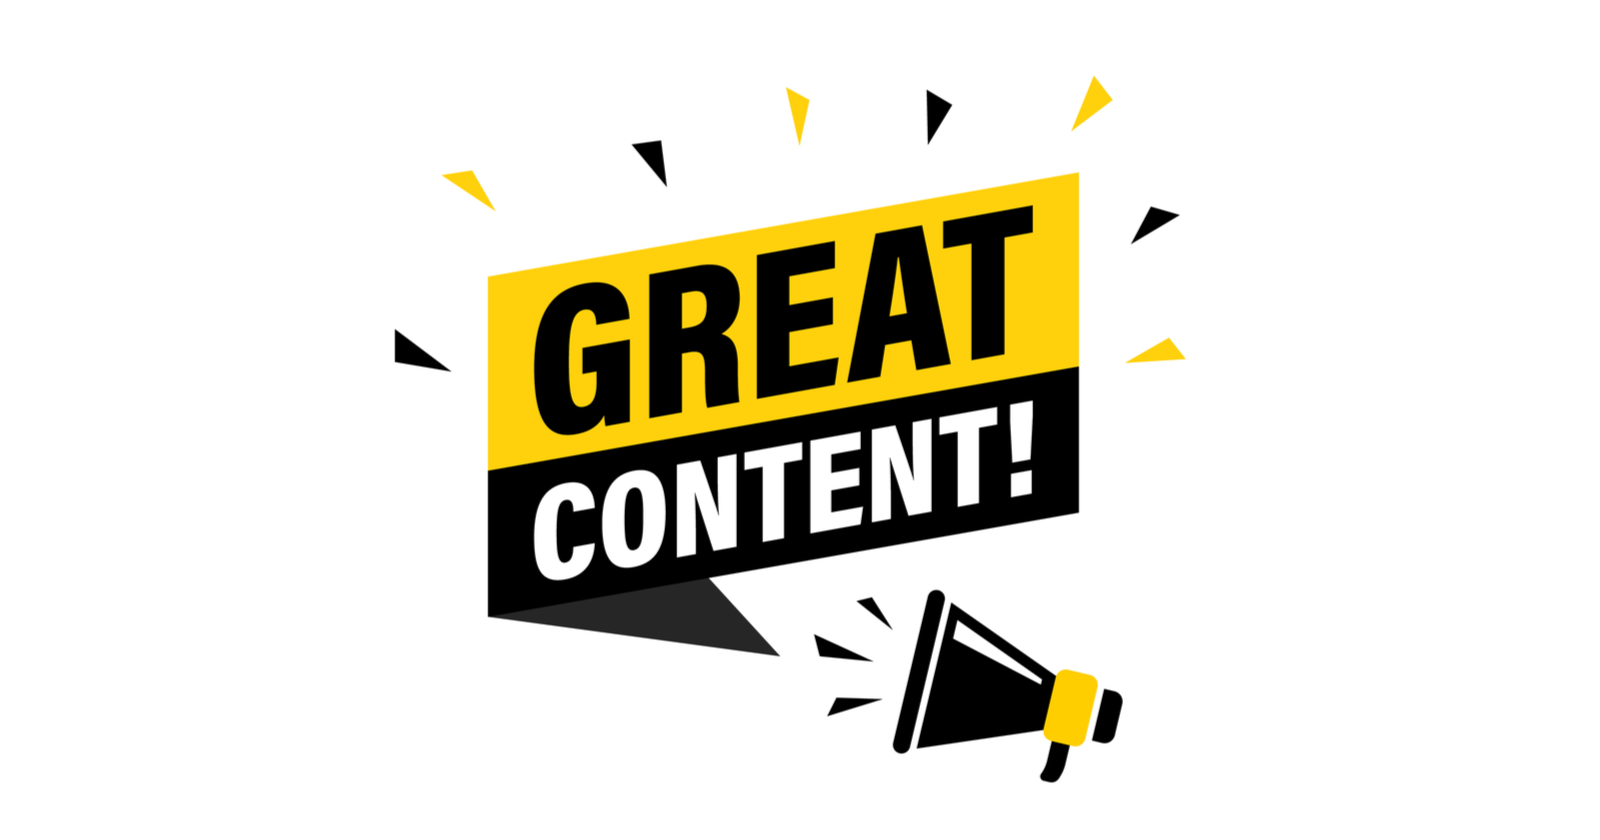 6-standards-of-content-greatness-5e5fe5543c15d.png